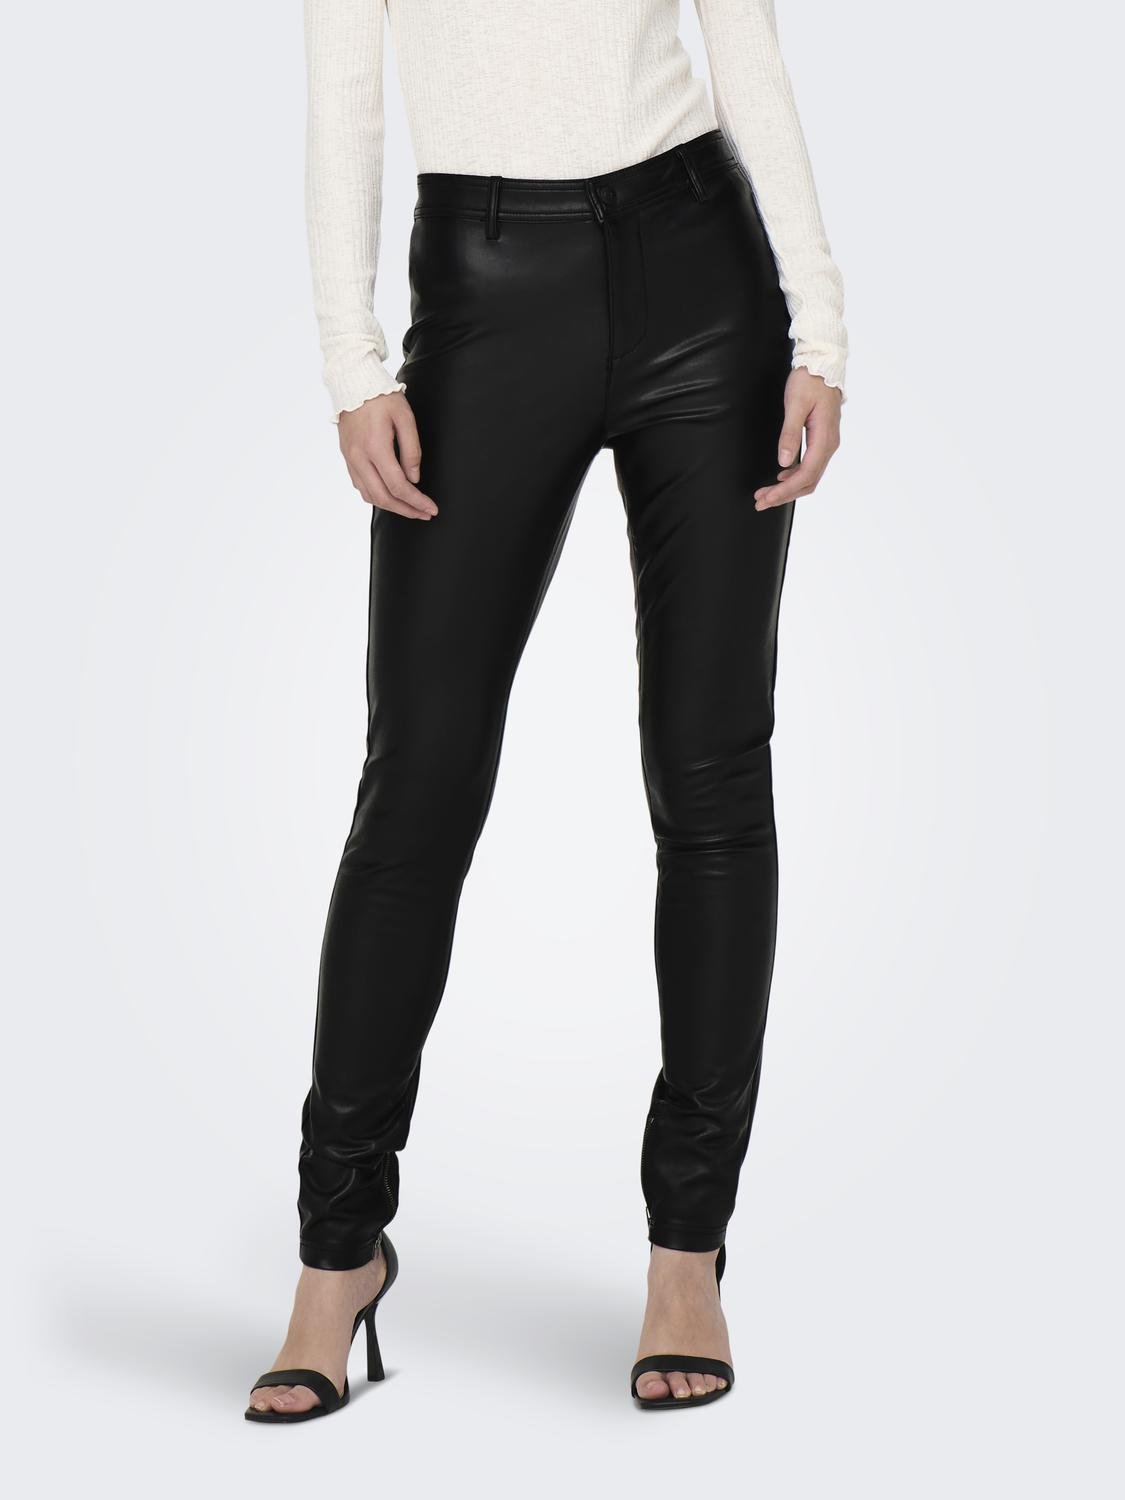 ONLY Leggings Skinny Fit Taille moyenne -Black - 15298591